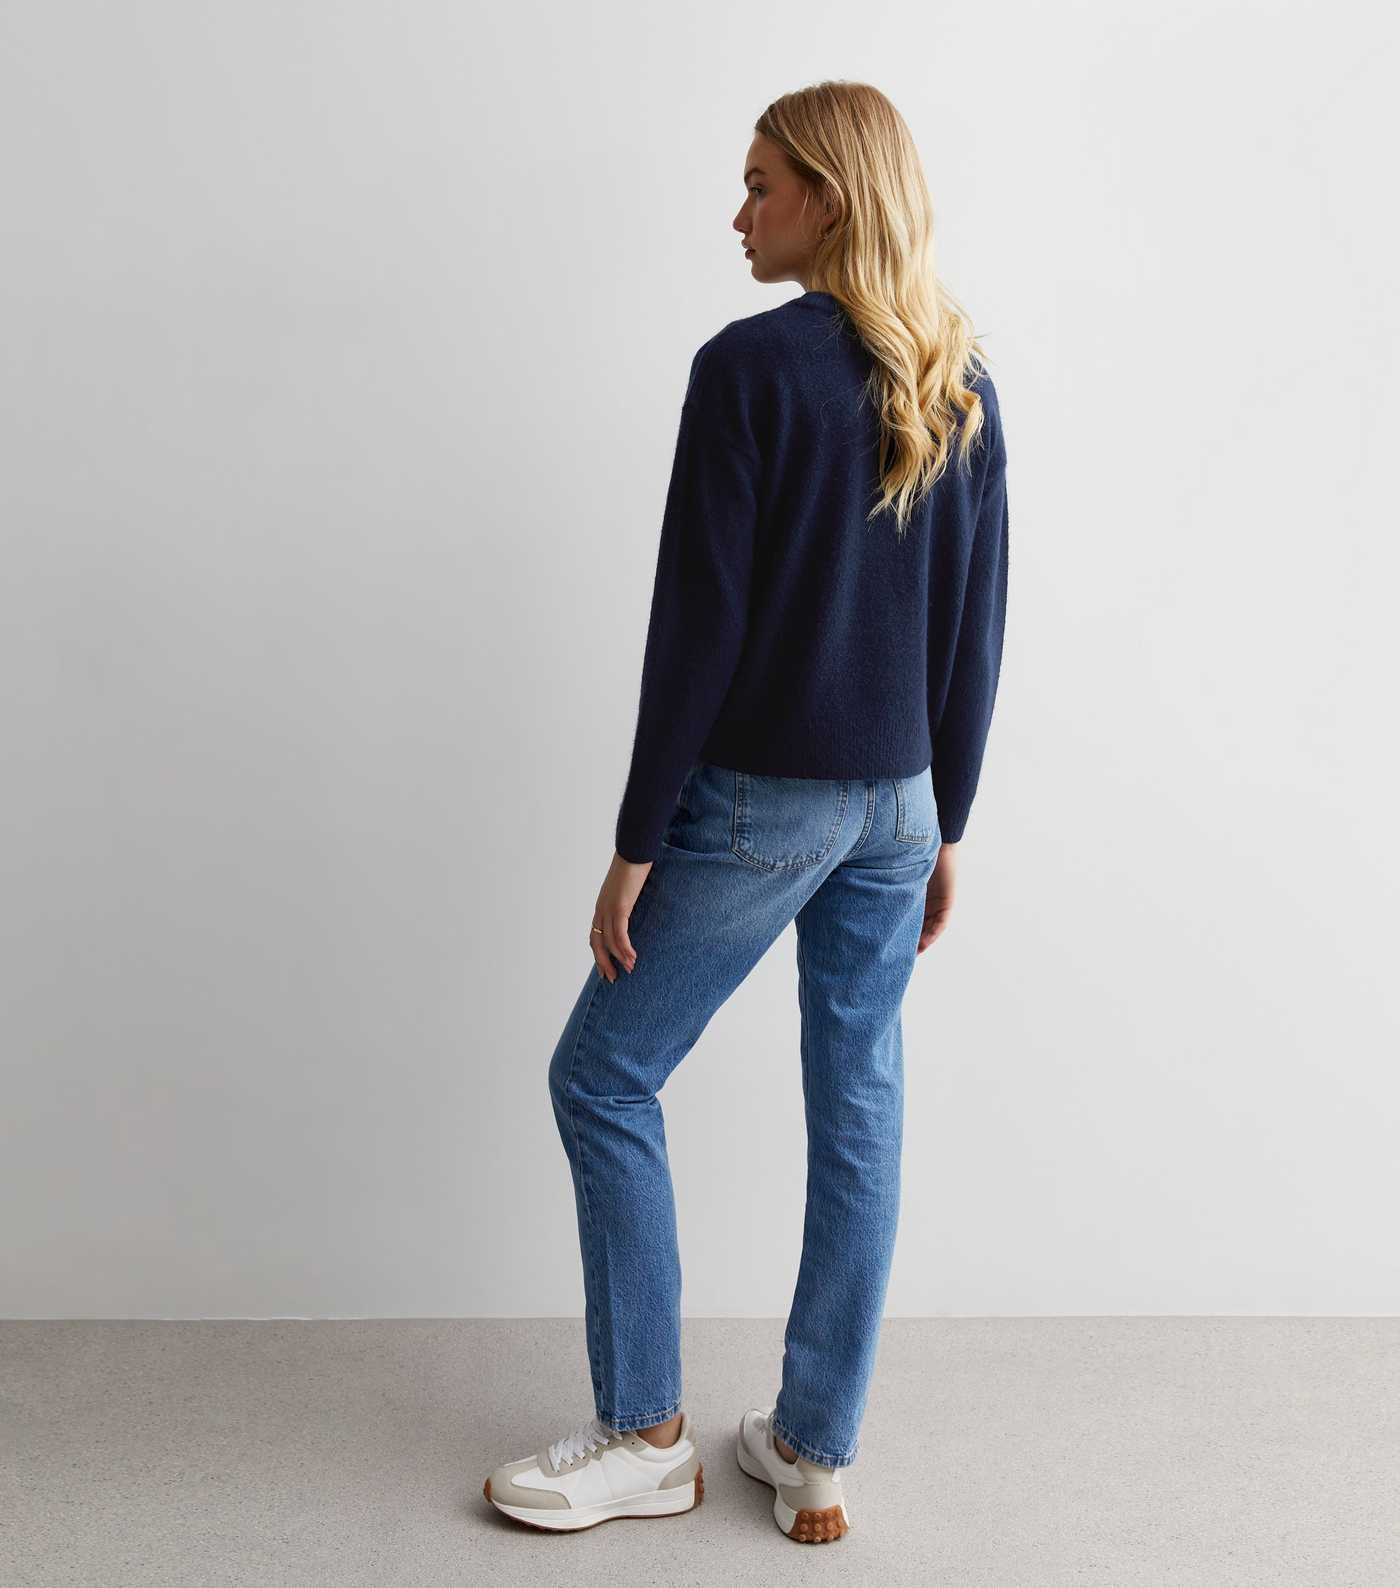 Navy Knit Crew Neck Jumper
						
						Add to Saved Items
						Remove from Saved Items | New Look (UK)